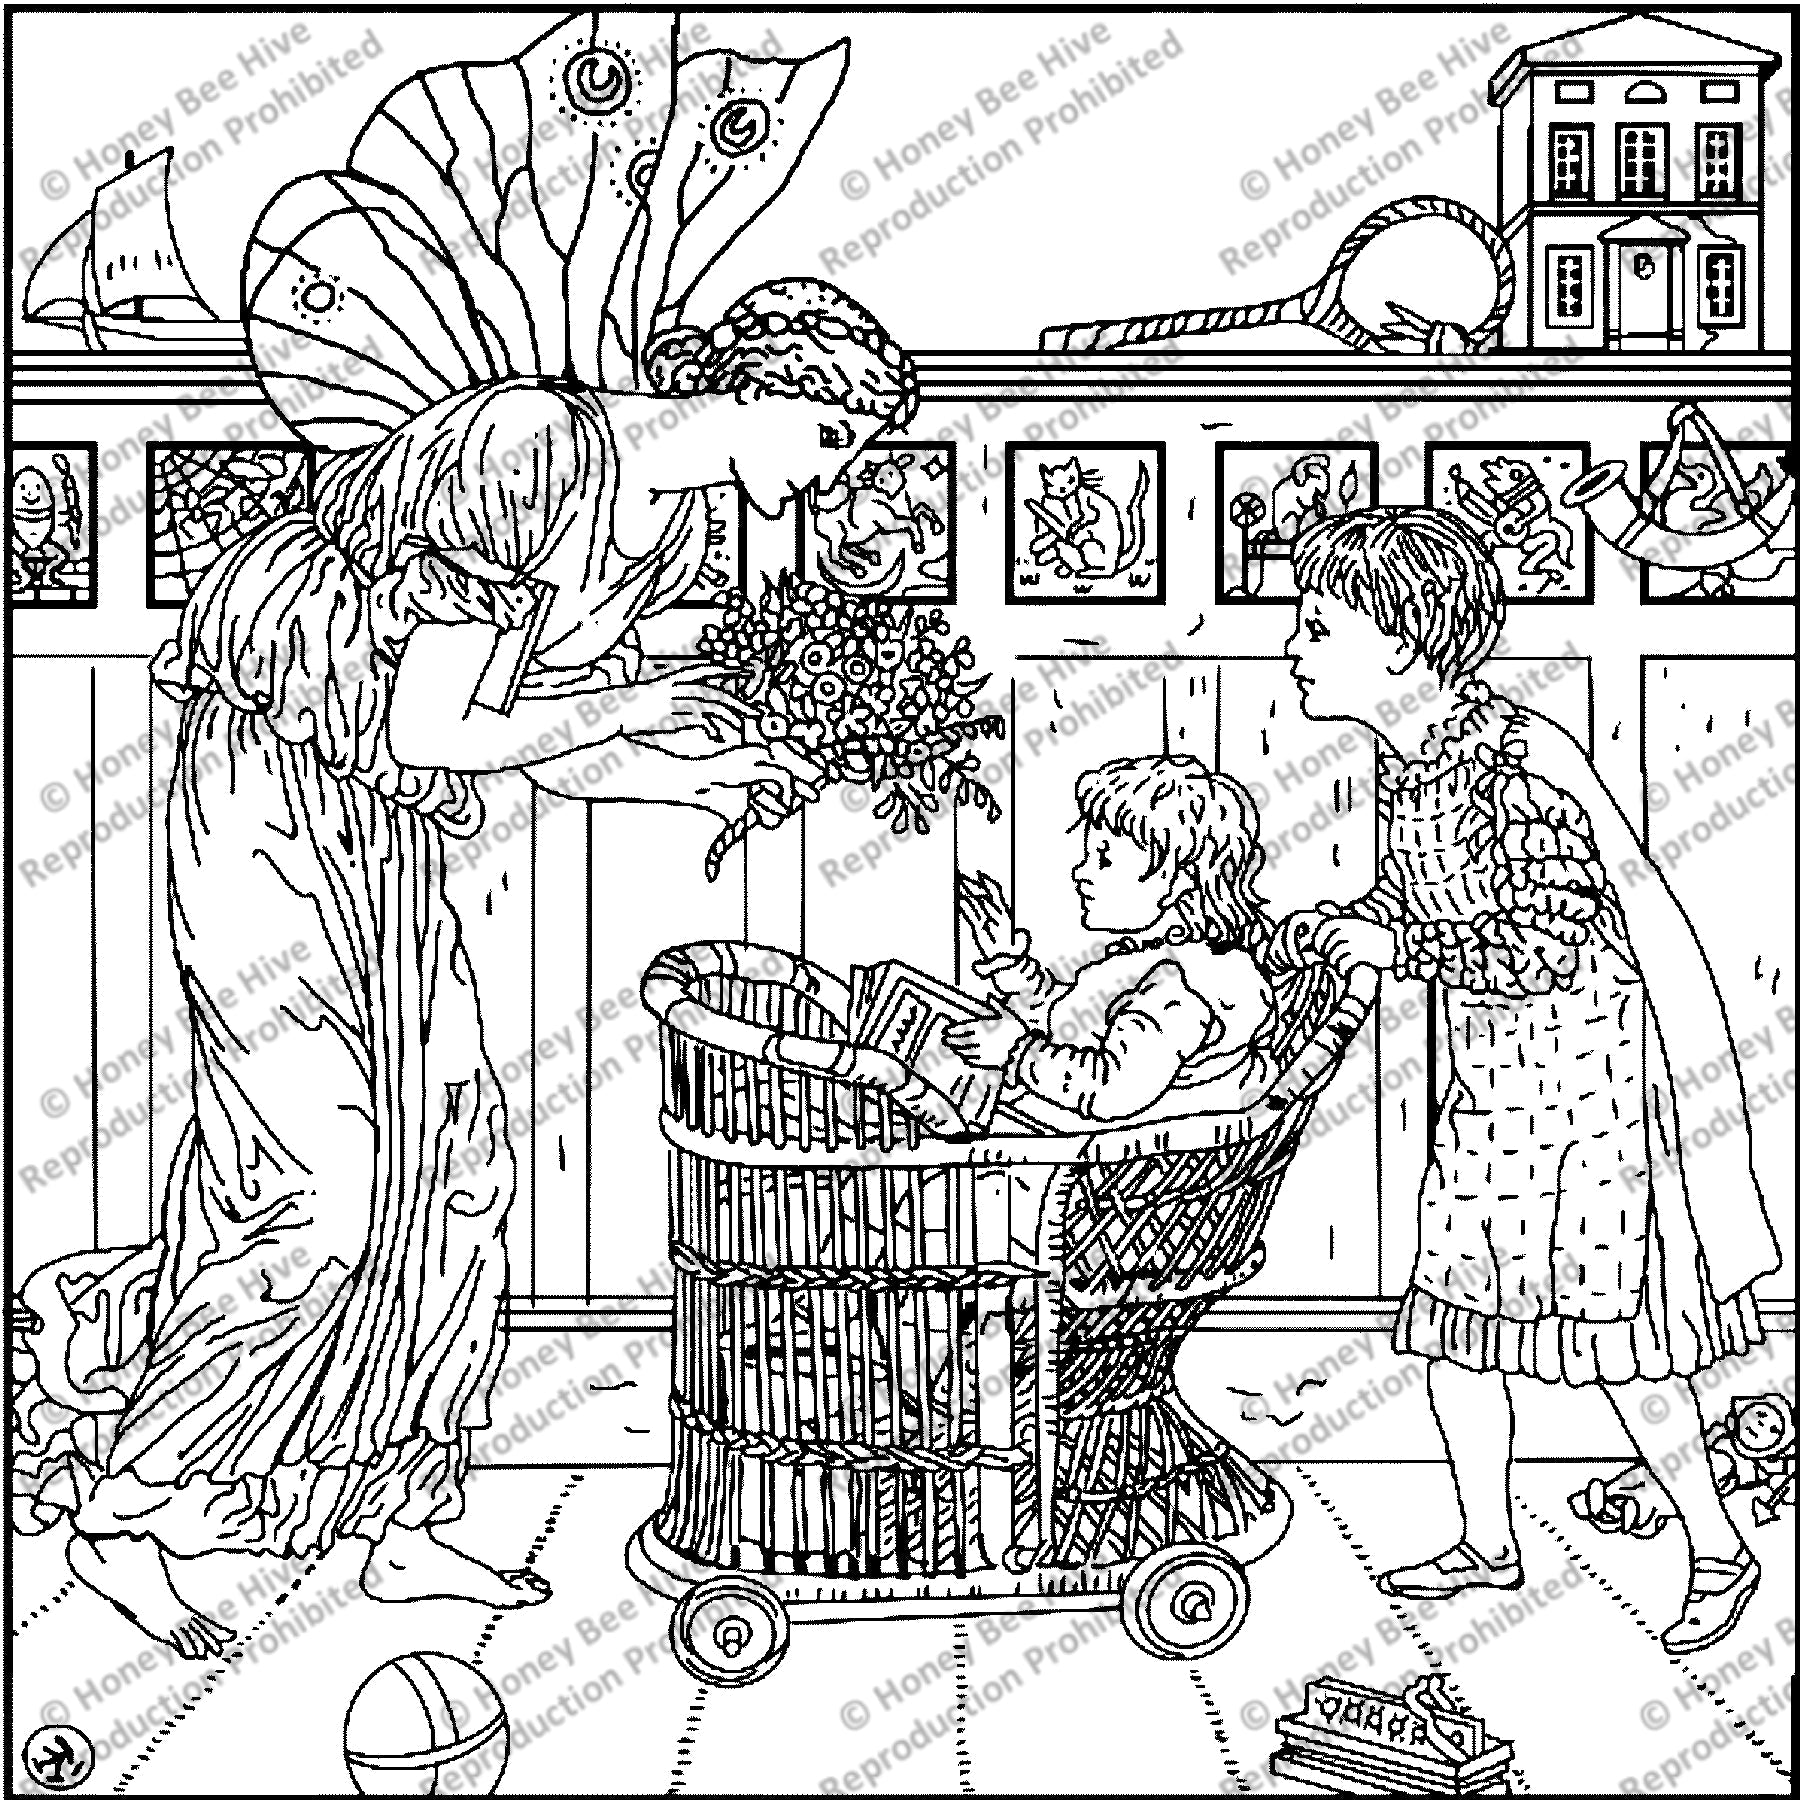 The Bouquet, ill. Walter Crane, 1878, rug hooking pattern